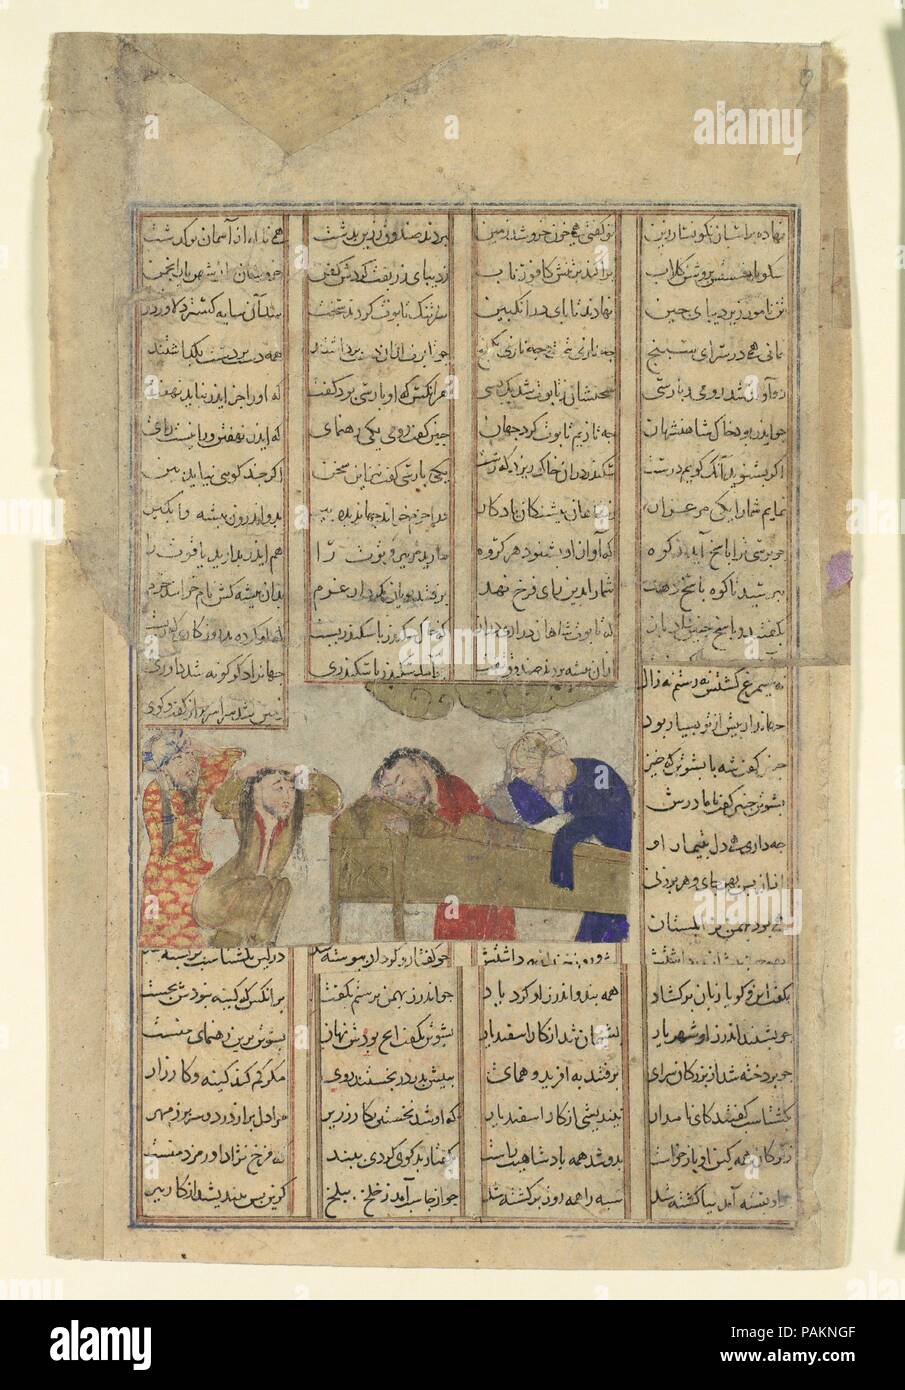 'The Funeral of Iskandar', Folio from a Shahnama (Book of Kings). Author: Abu'l Qasim Firdausi (935-1020). Dimensions: Page: 8 1/16 x 5 1/4 in. (20.5 x 13.3 cm)  Painting: 1 3/4 x 3 1/4 in. (4.4 x 8.3 cm). Date: ca. 1330-40.  Iskandar (Alexander the Great), having been warned by a talking tree of his impending death, took sick and died in Babylon. His gilded bier was carried out on the plain while all mourned. This miniature, with the white background of the plain and the gold coffin, movingly portrays the grief displayed by the mourners rending their hair and clothes. Two miniatures from the  Stock Photo